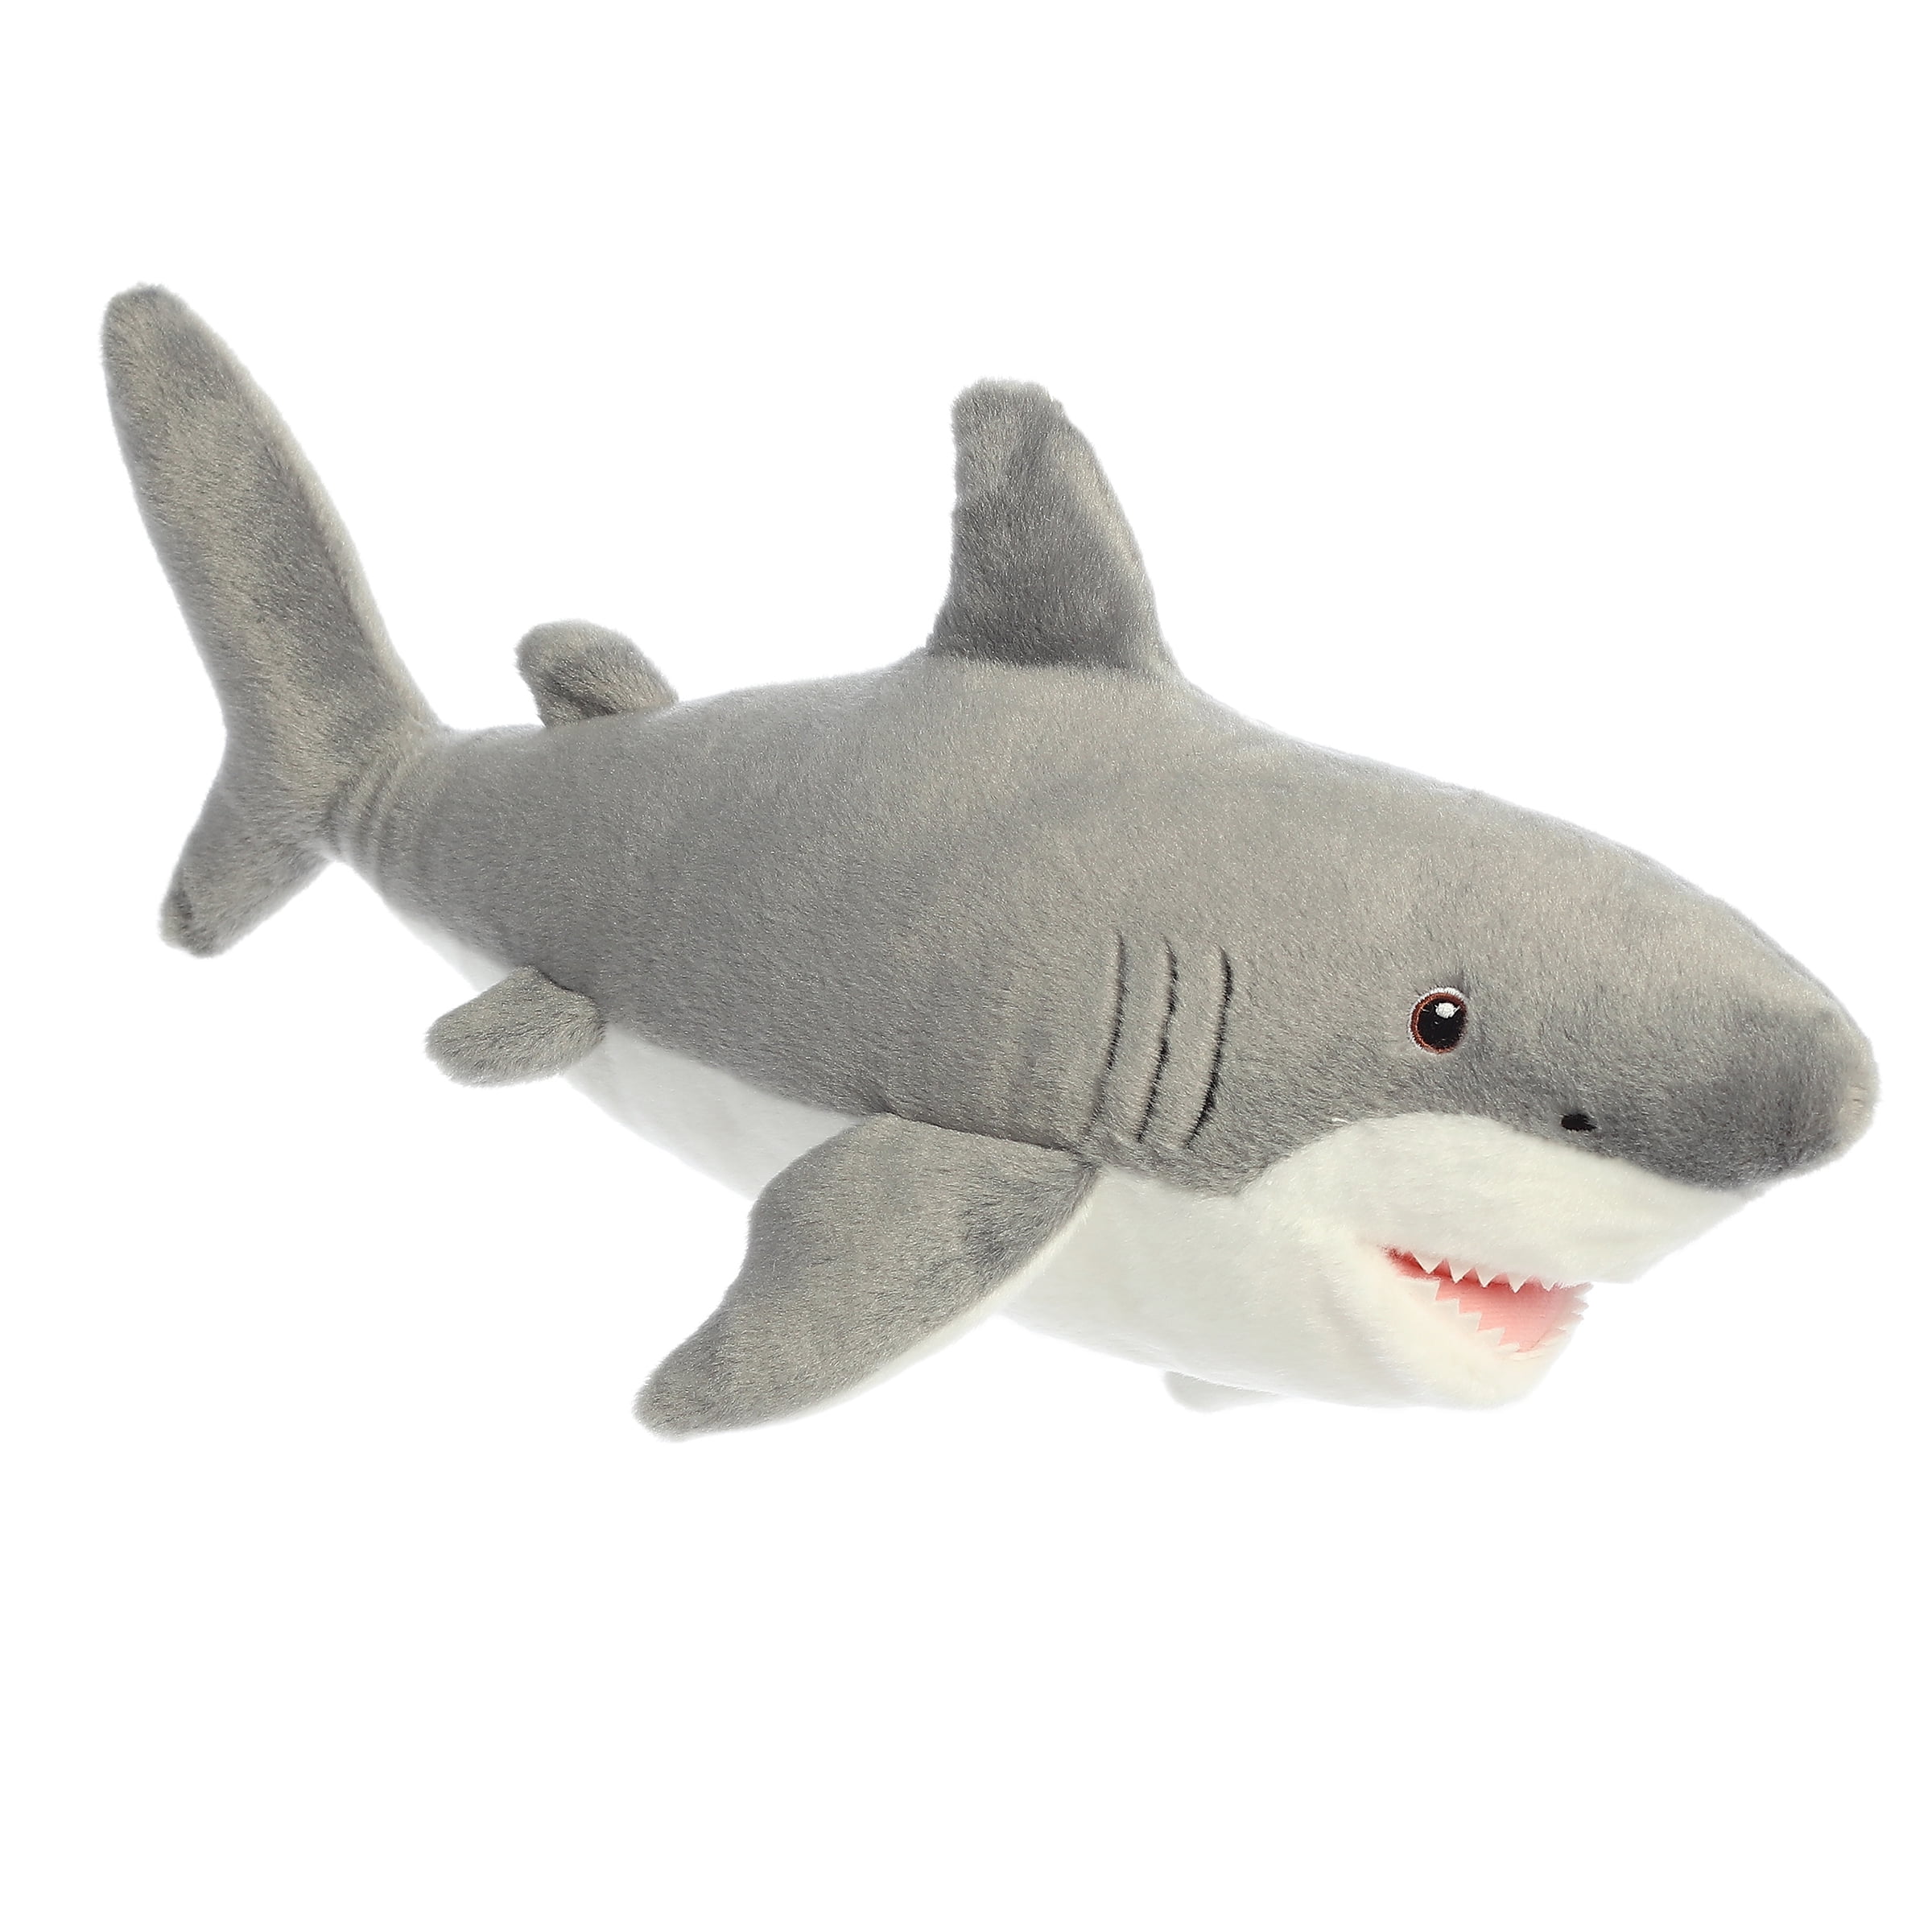 Emotional Support Great White Shark Plush Stuffed Animal Personalized Gift  Toy -  Canada